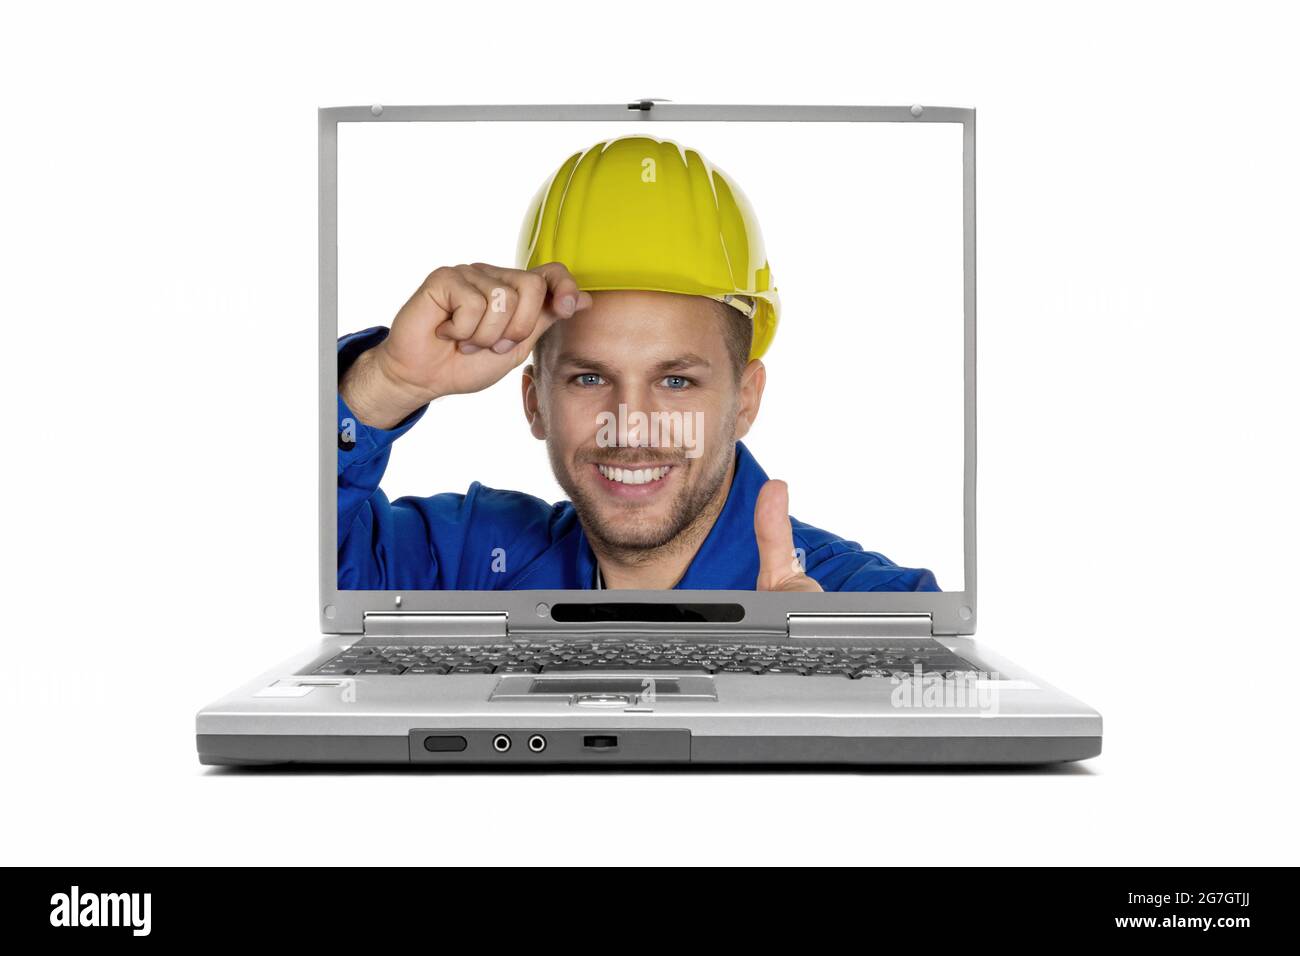 worker with hardhat on the display of a laptop Stock Photo